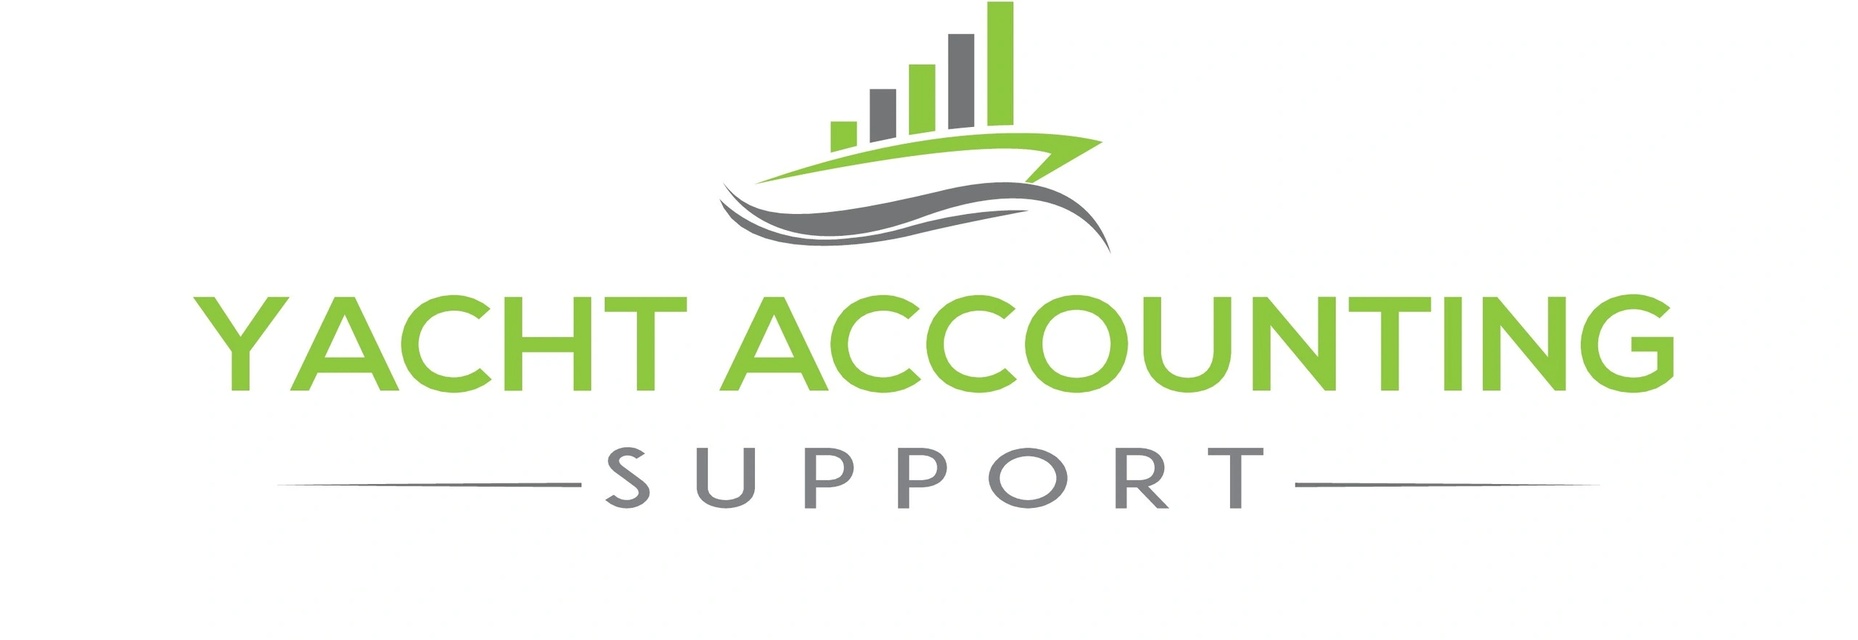 YACHT ACCOUNTING SUPPORT